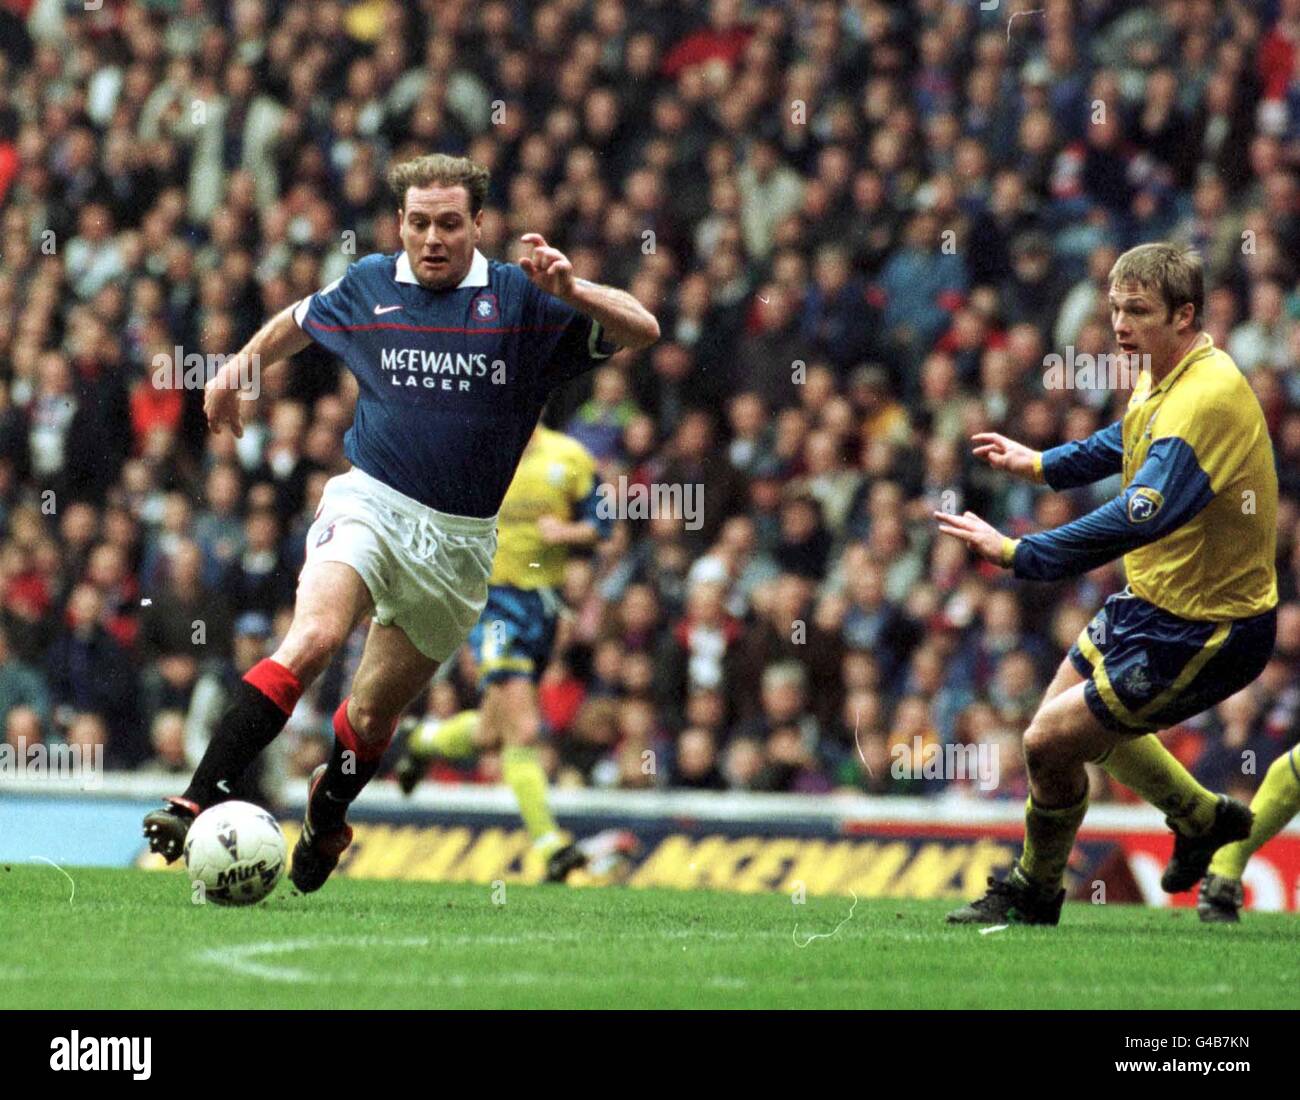 Ranger's Paul Gascoigne in action during this afternoon's (Saturday) Bells's Scottish League clast against St.Johnstone at Ibrox. Rangers defeated St. Johnstone 2-1. Photo by Chris Bacon/PA Stock Photo